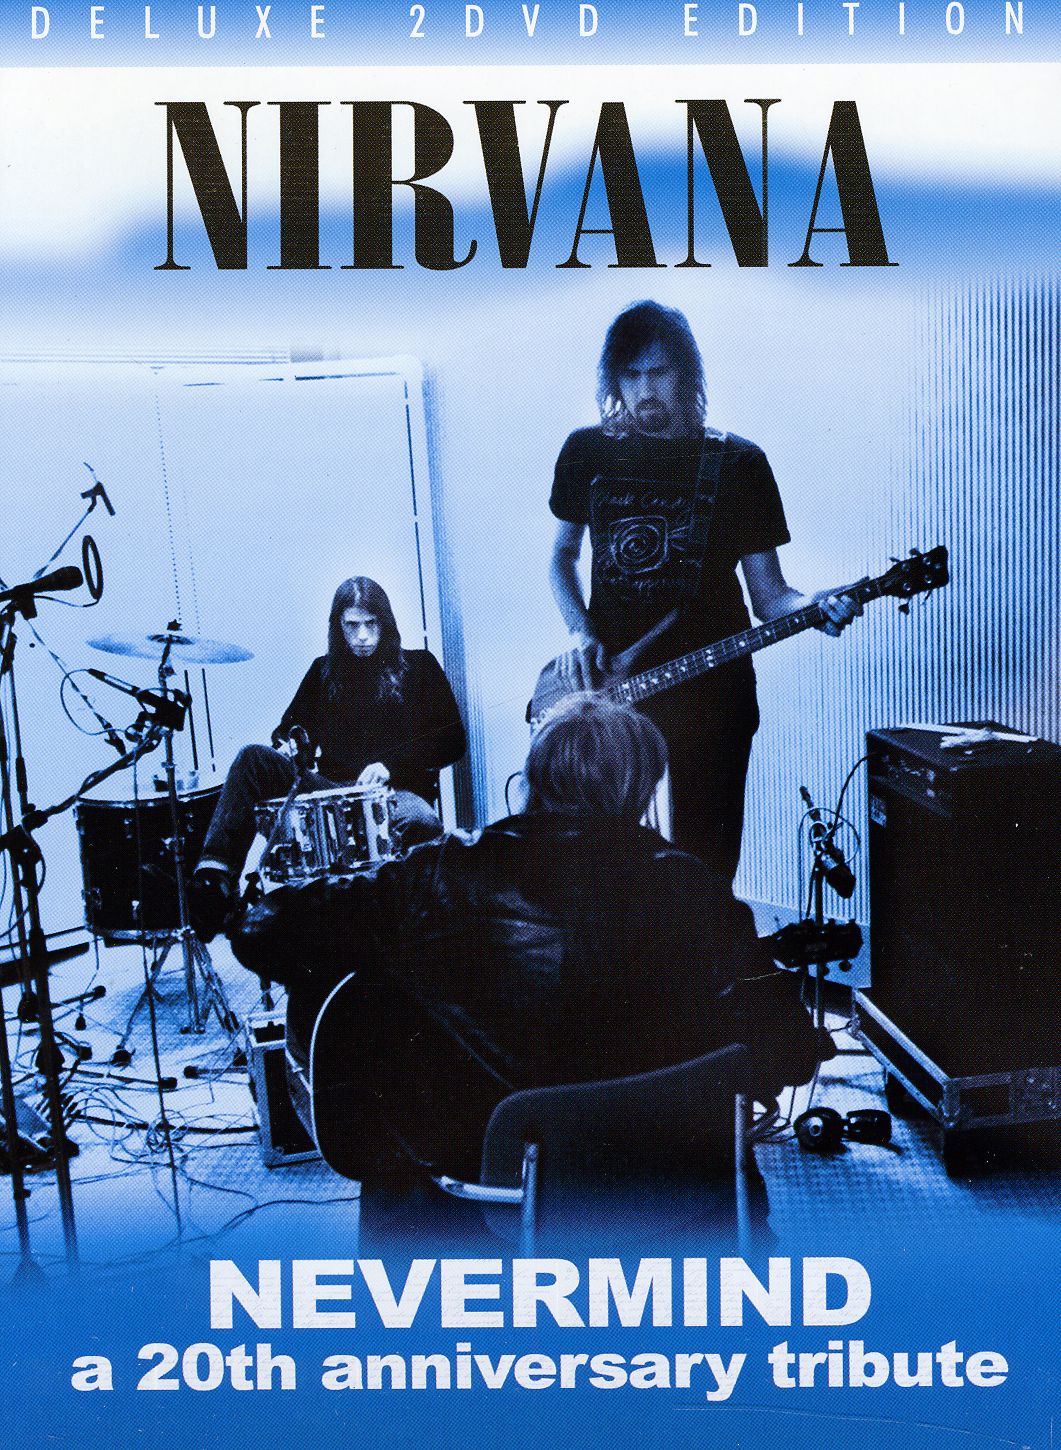 NIRVANA-NEVERMIND: A 20TH ANNIVERSARY TRIBUTE